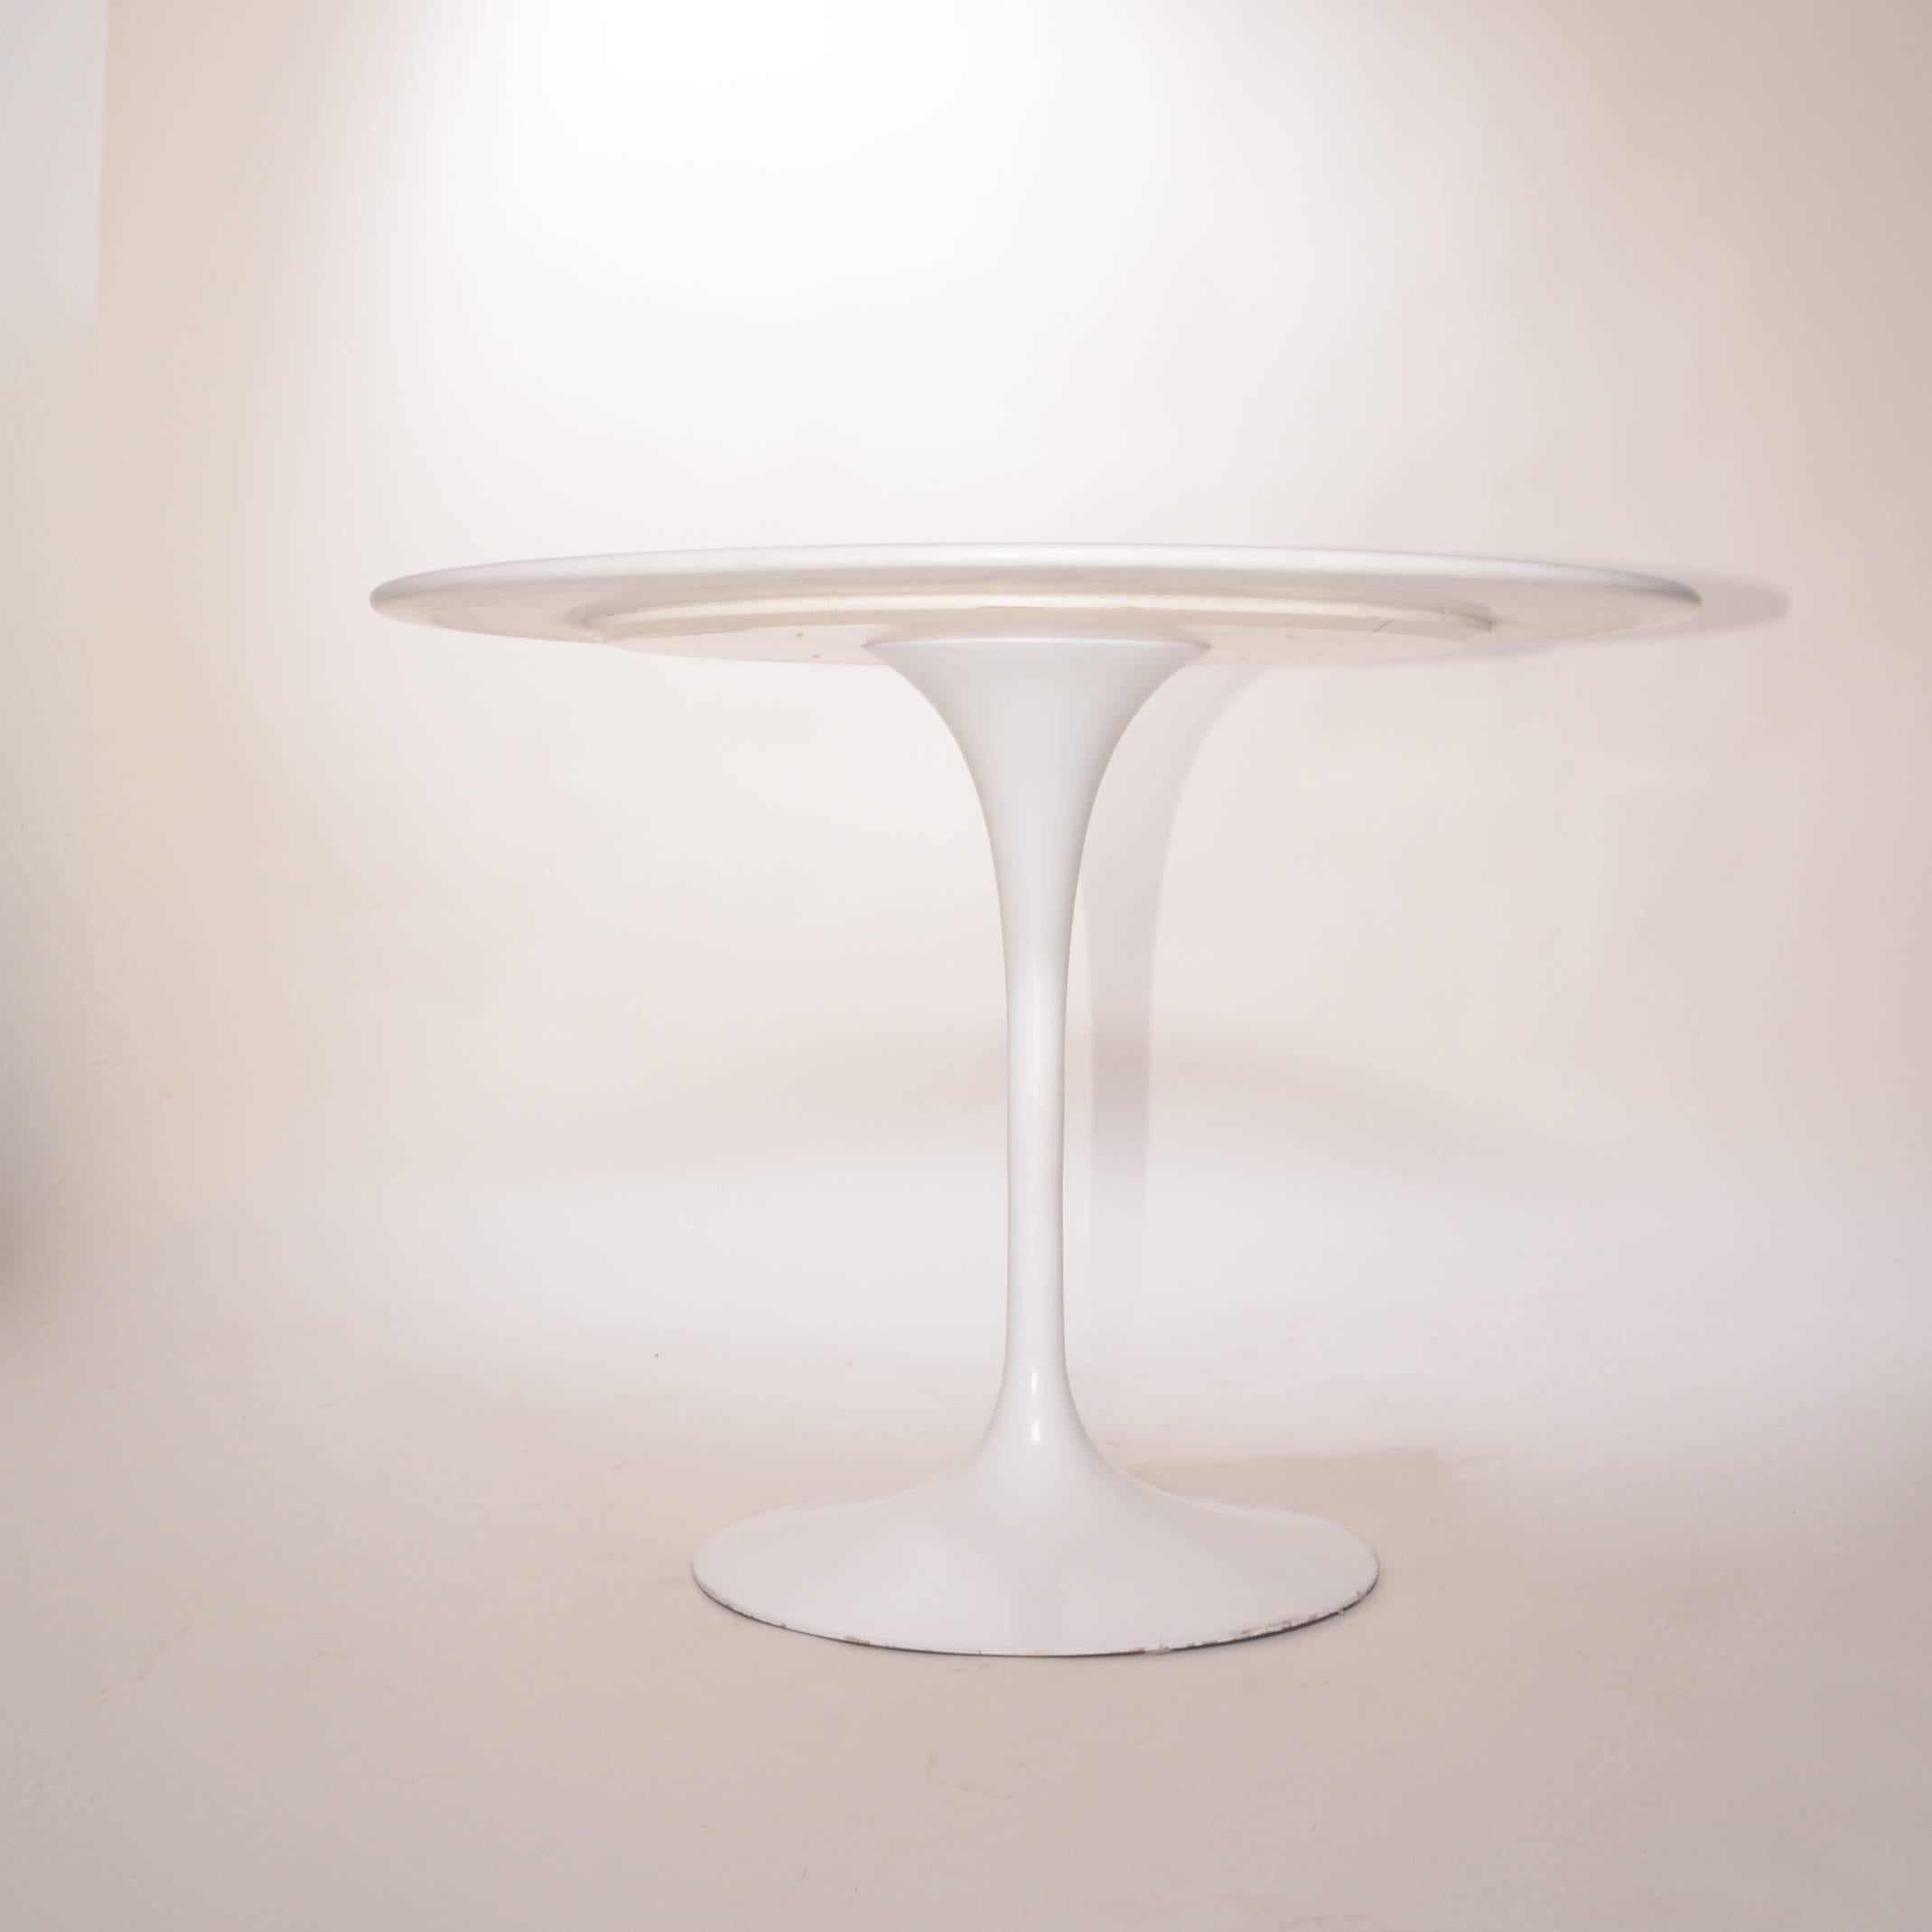 American Early Production 'Tulip' Table by Eero Saarinen for Knoll Associates